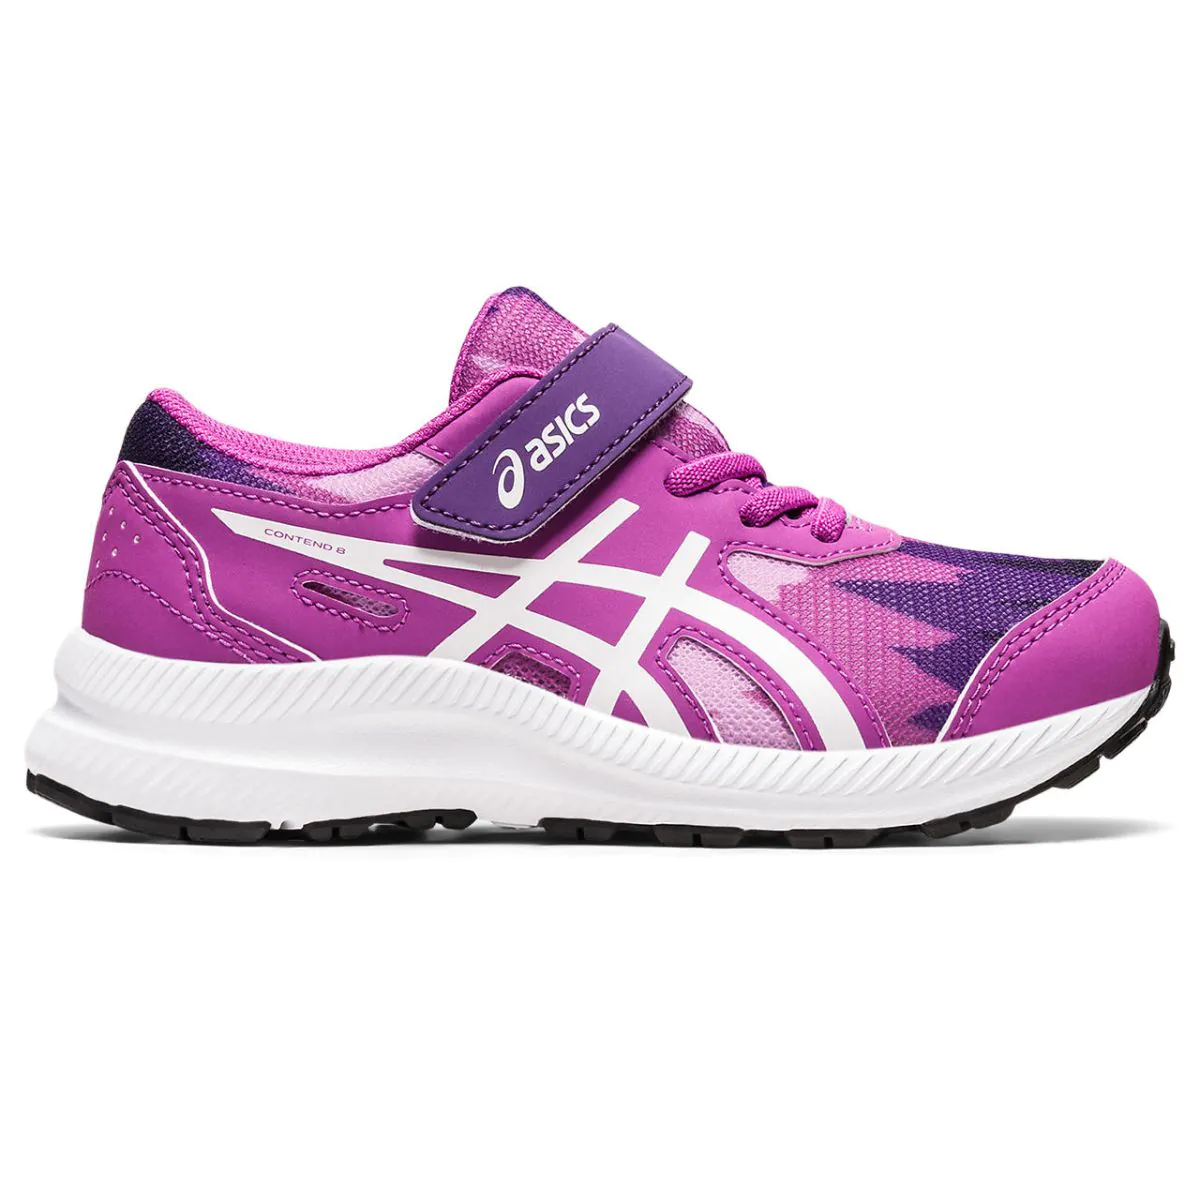 Asics Gontend 8 Print Kid\'s Running Shoes (PS) 1014A293-500